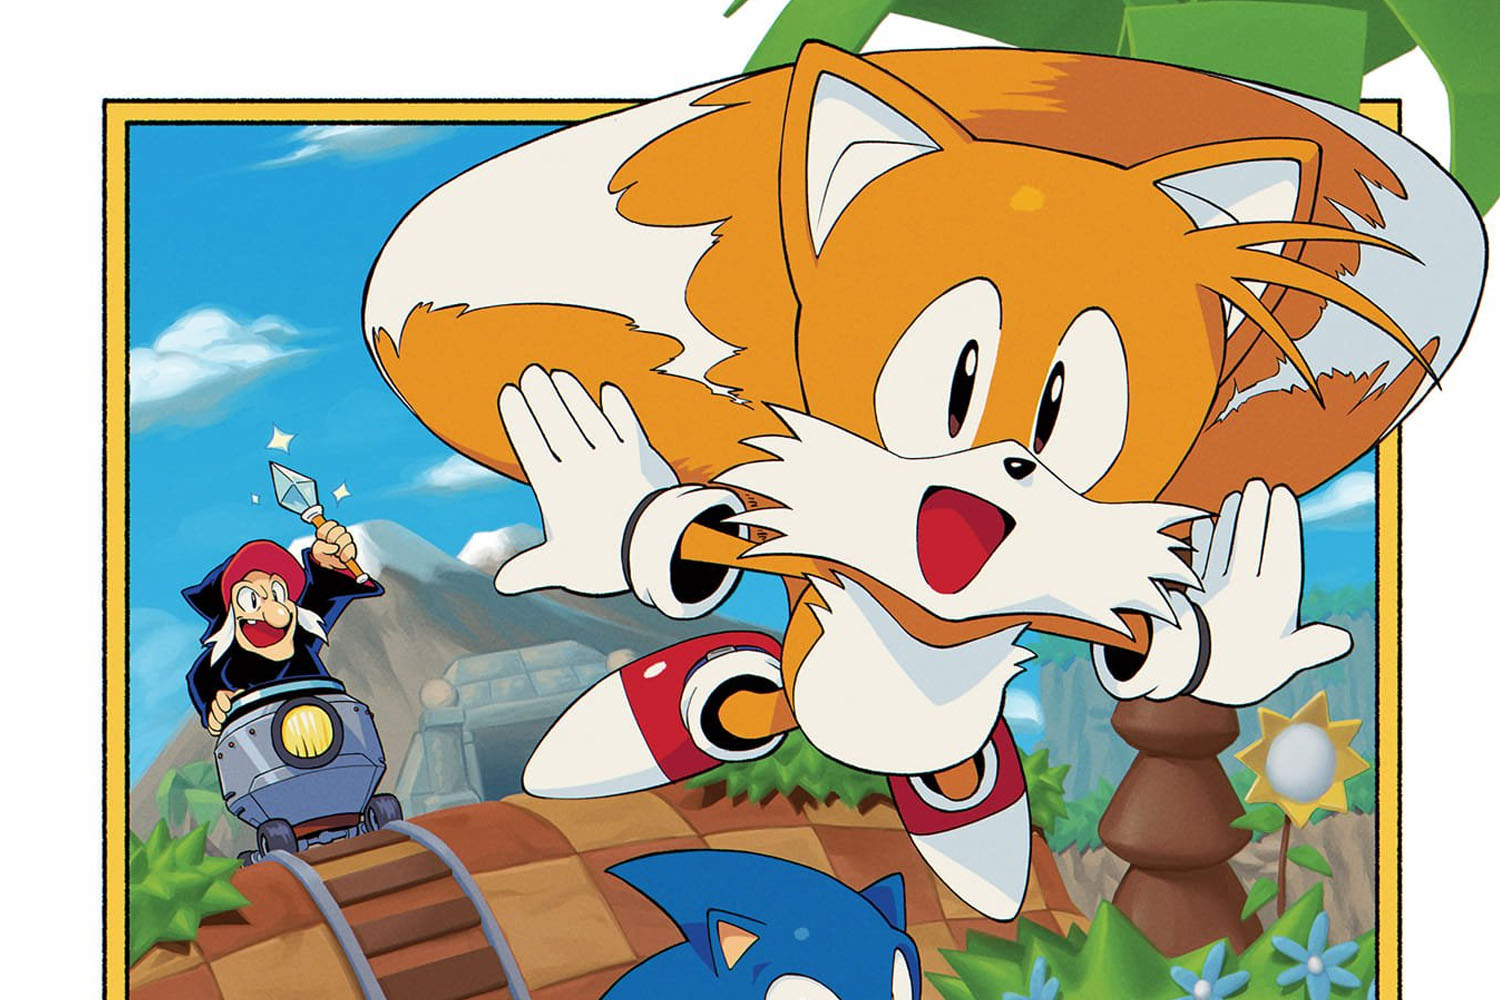 'Sonic the Hedgehog: Tails' 30th Anniversary Special' review